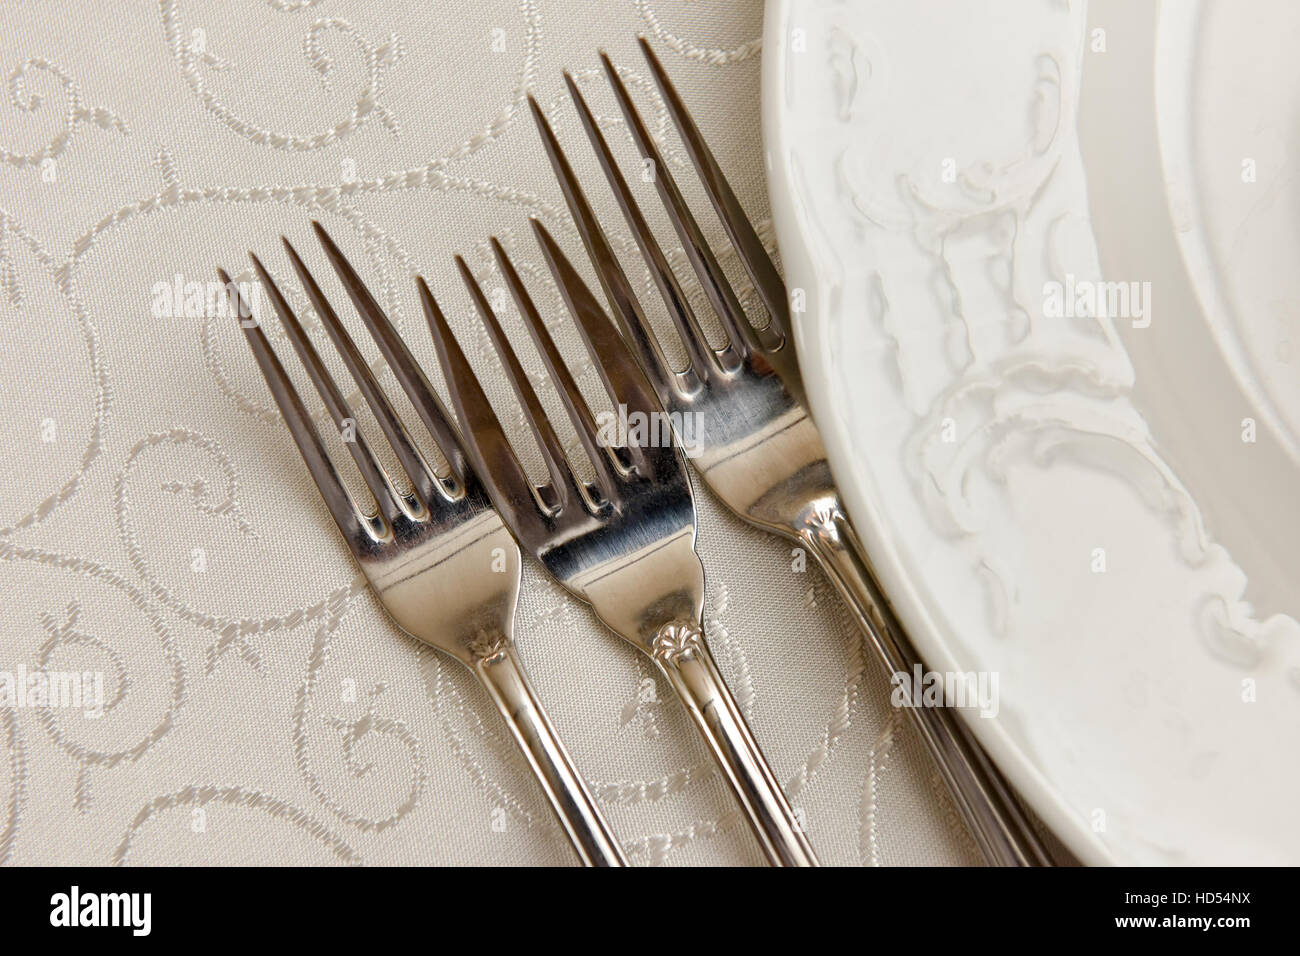 Cutlery and plate on the table in natural light Stock Photo